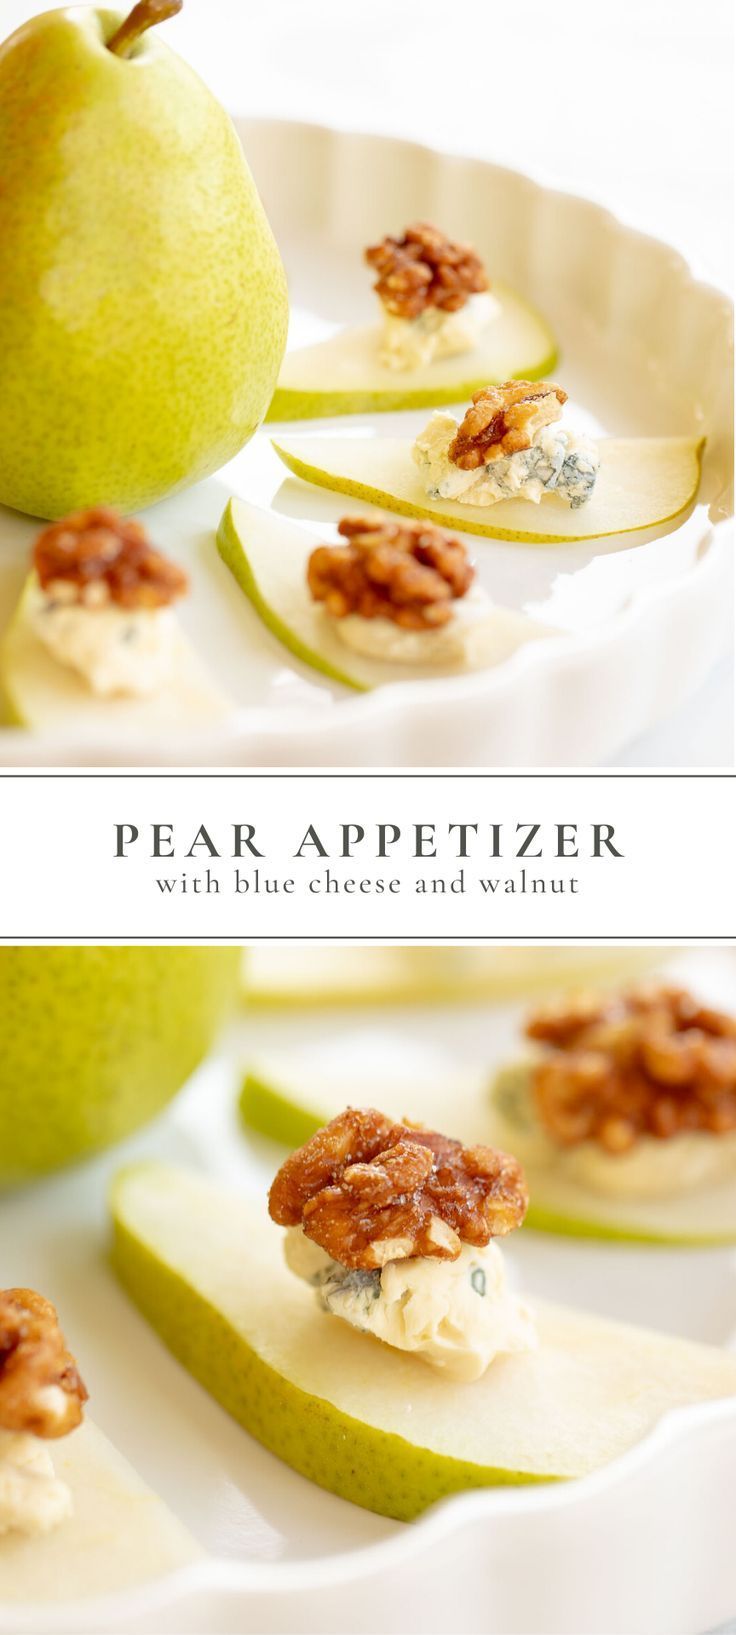 Easy Pear Appetizer A Healthy Holiday Appetizer | Julie Blanner -   17 savory holiday Food ideas